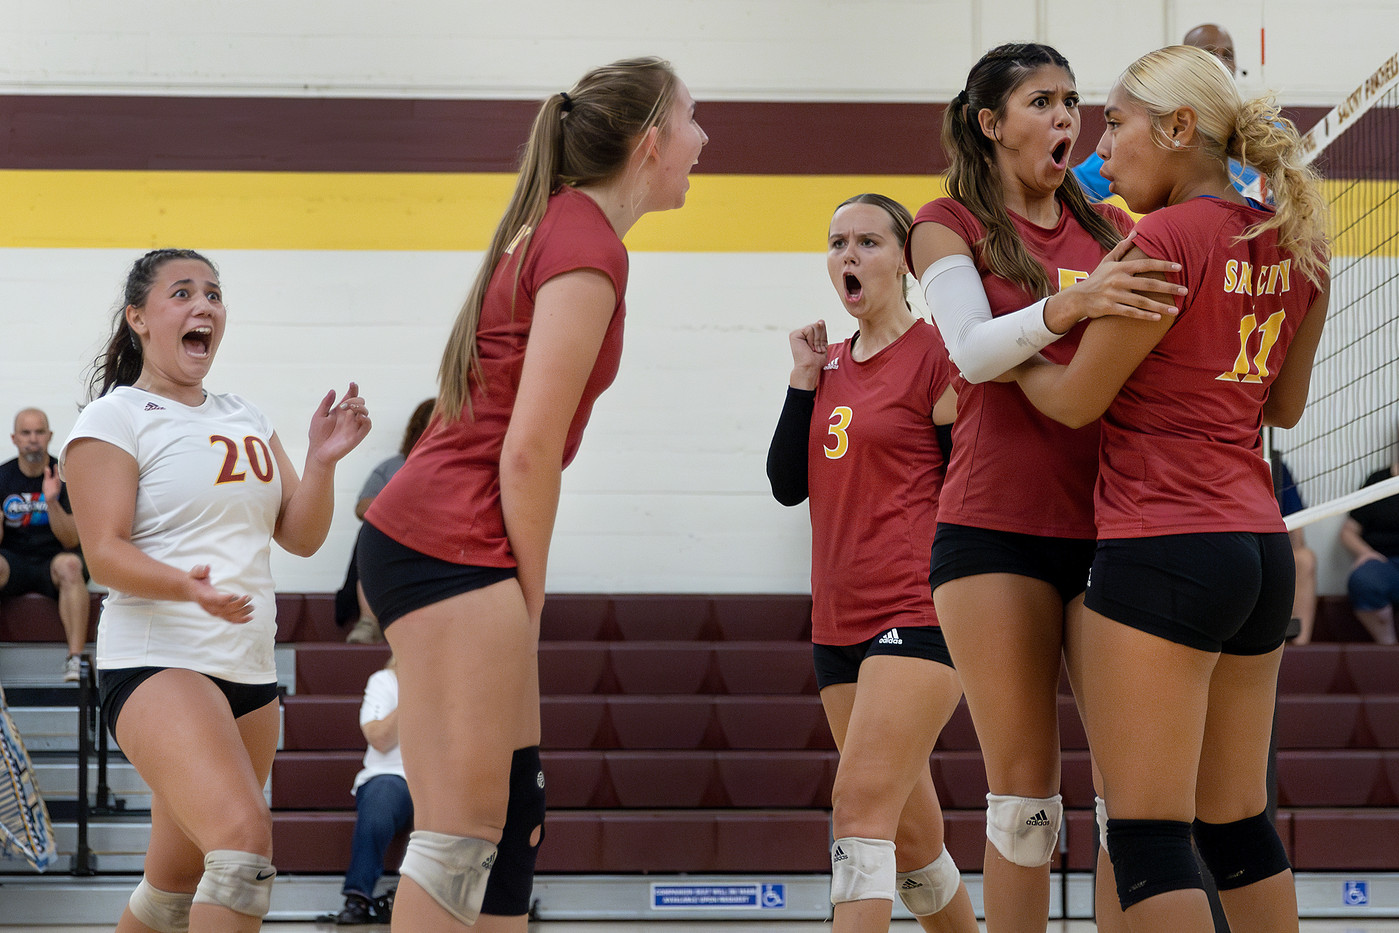 The Panthers sweep the Vikings 3-0 (25-18, 25-20, 25-8) on Wednesday evening